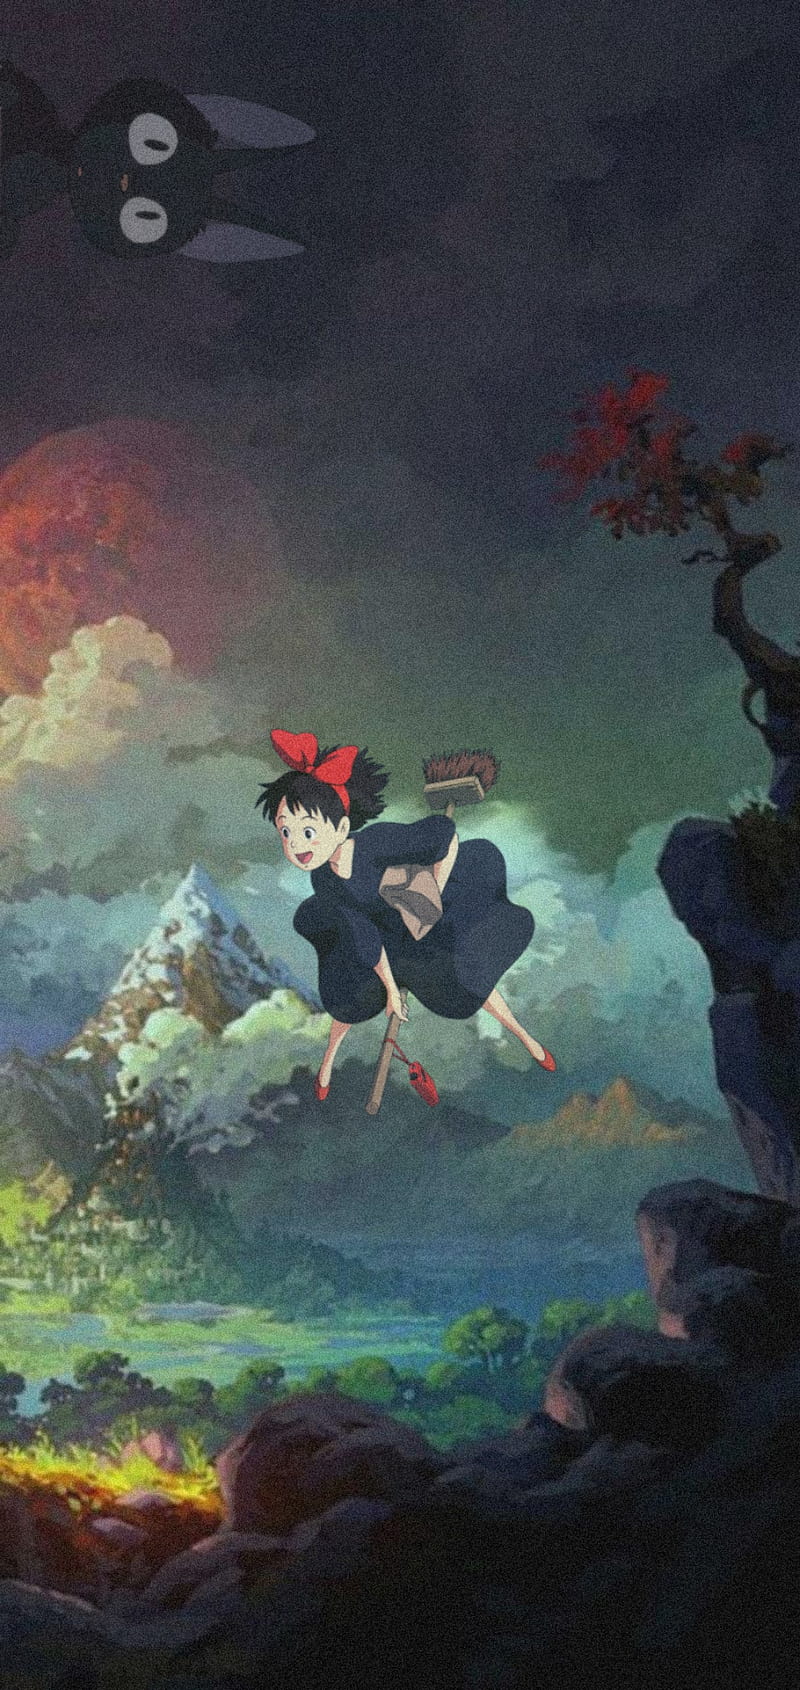 1920x1080  1920x1080 studio ghibli totoro my neighbor totoro howls moving  castle kikis delivery service wallpaper JPG 163 kB  Coolwallpapersme